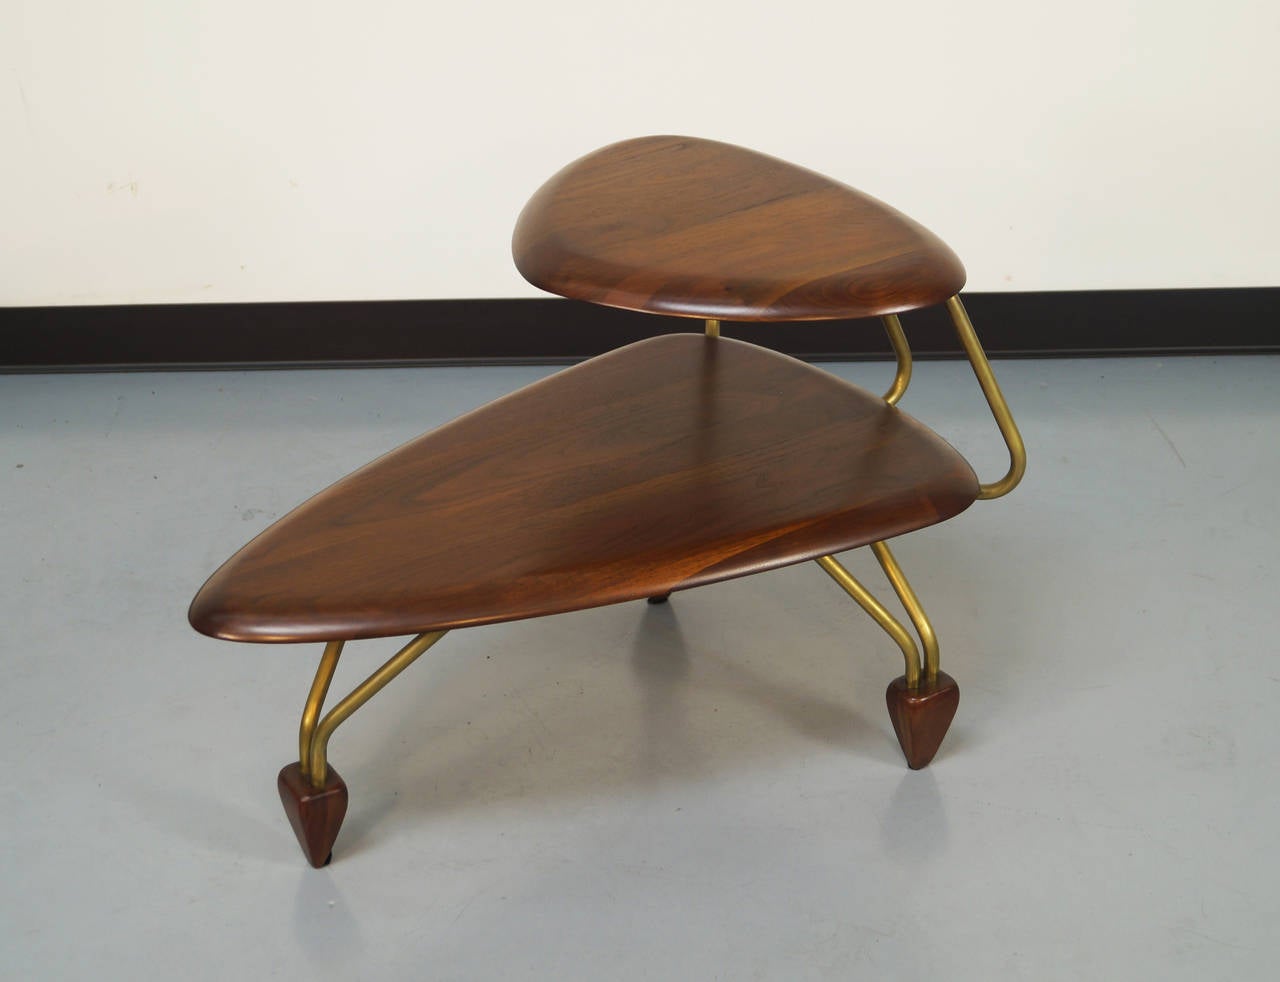 Rare side tables designed by John Keal for Brown & Saltman. Beautiful grain with body mounted on brass legs and anchored with wooden feet.

Matching coffee table also available.